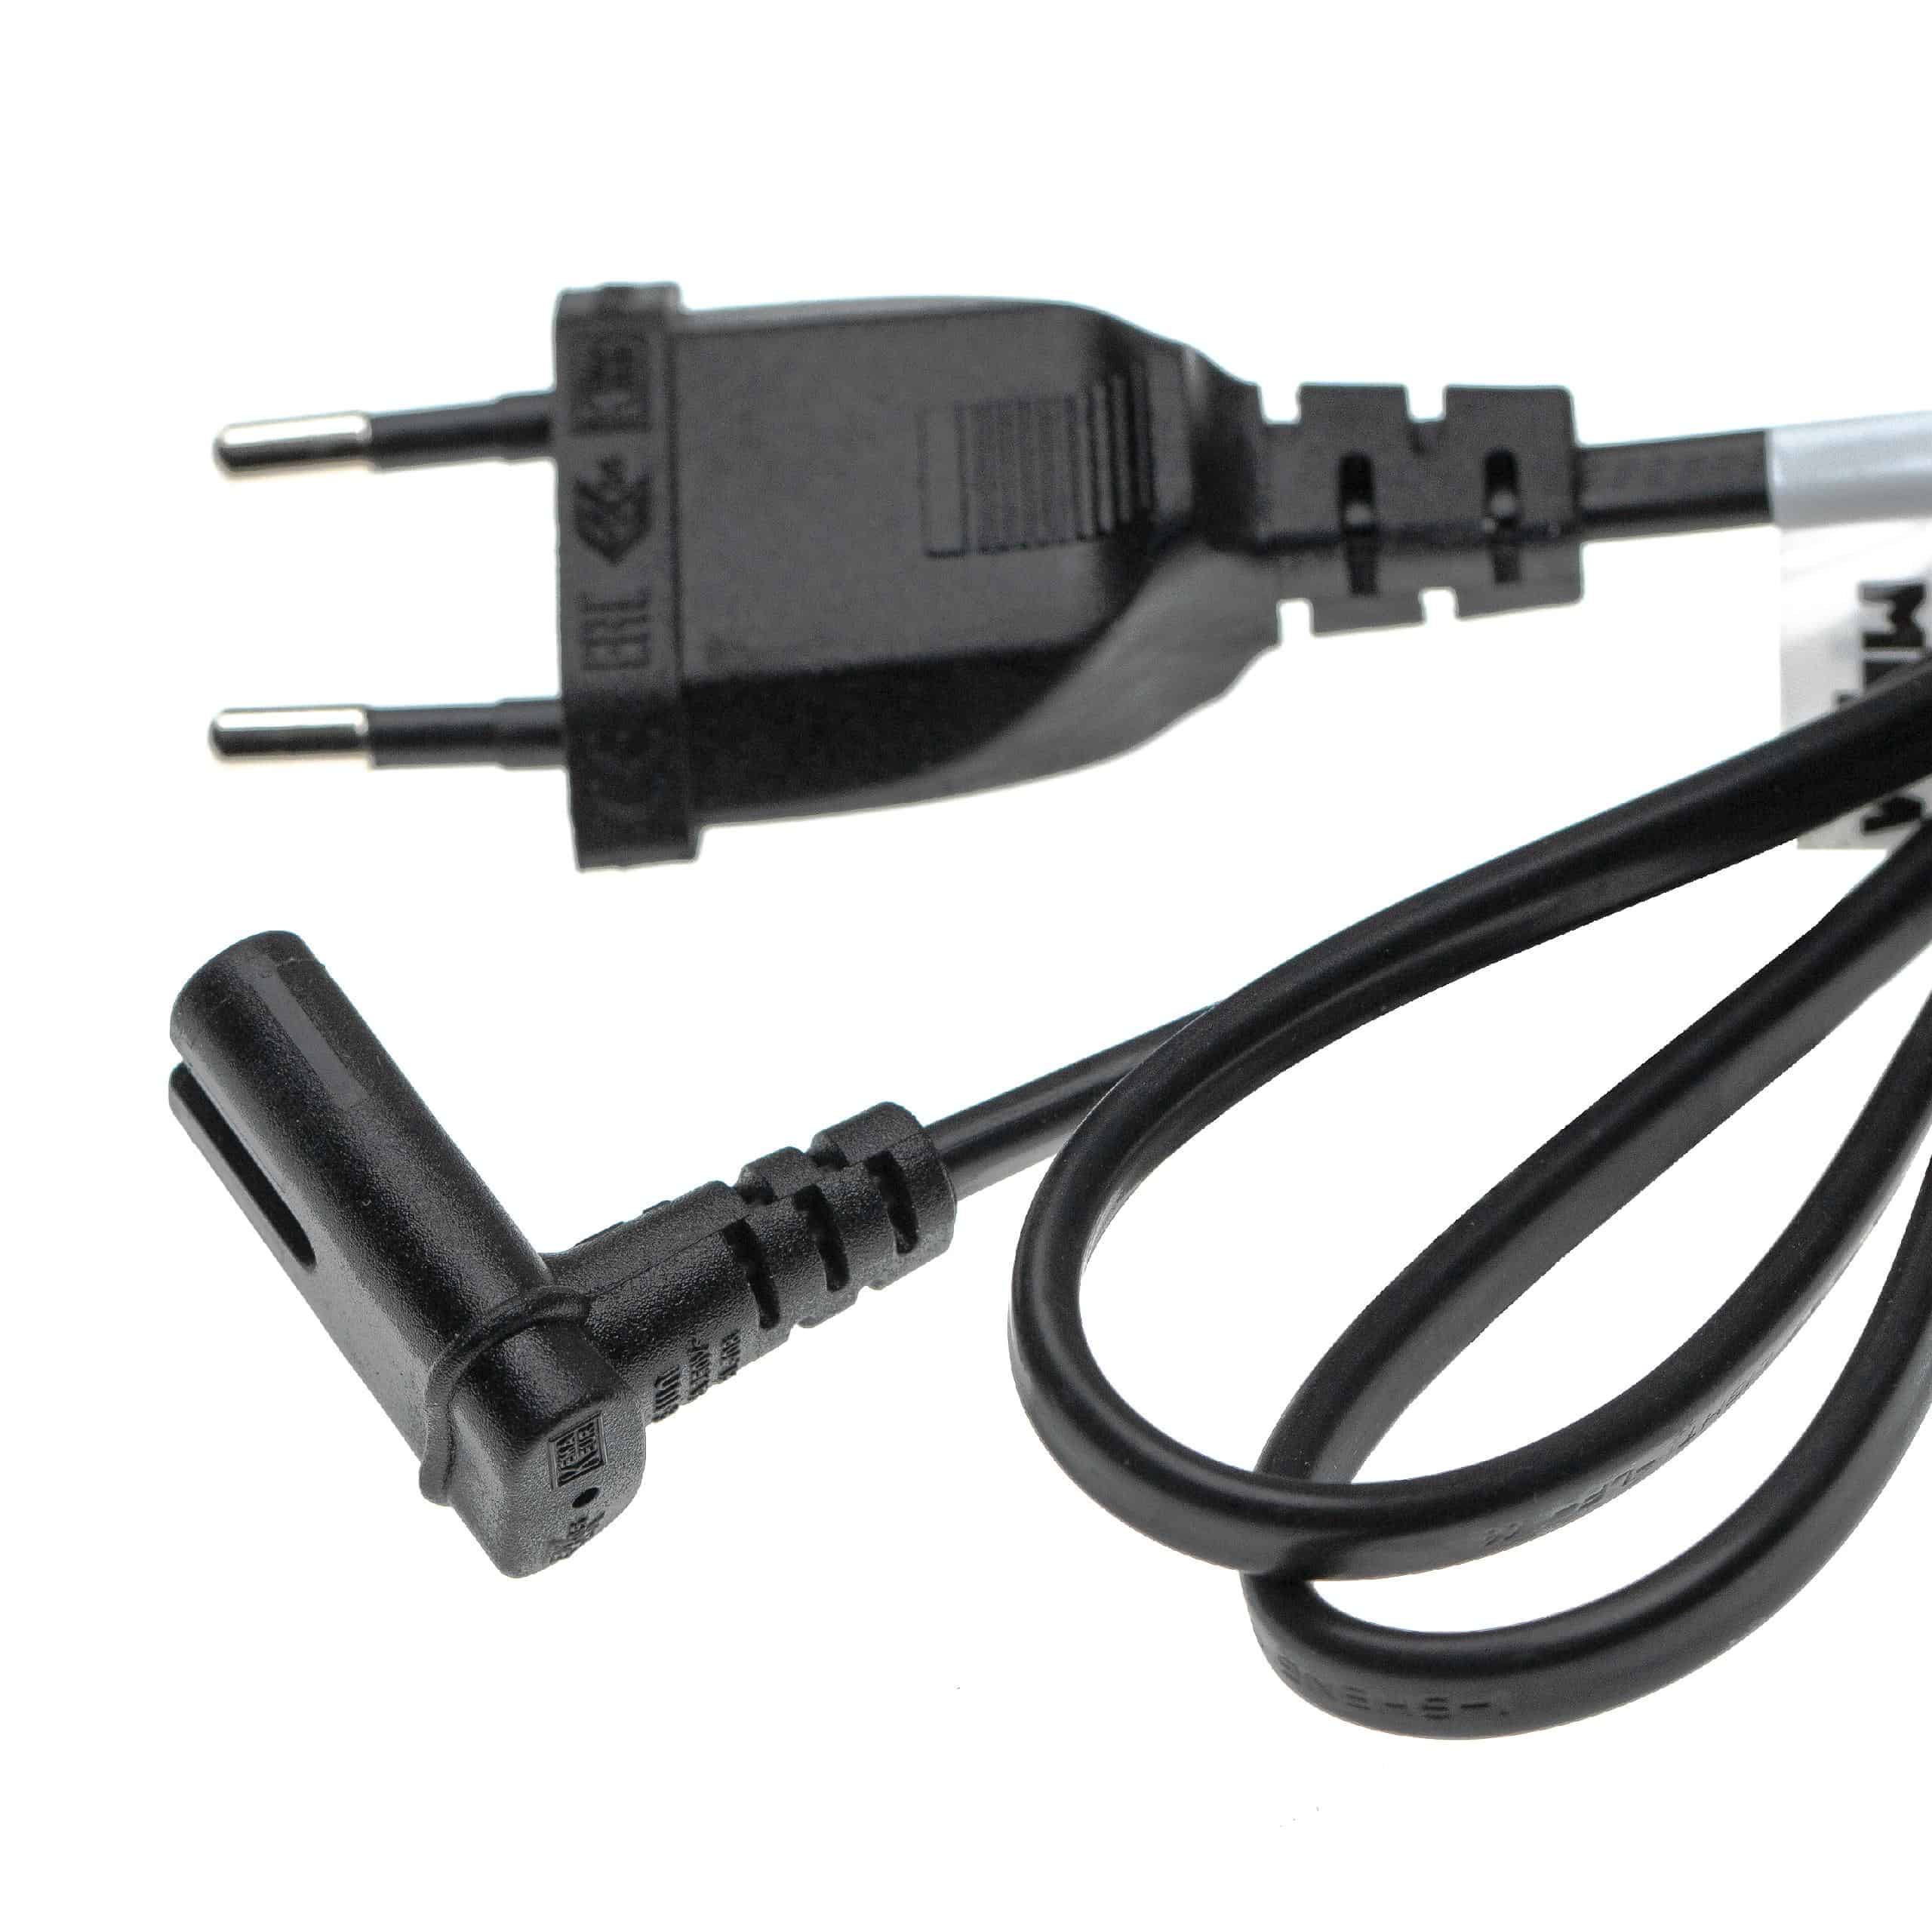 C7 Power Cable Euro Plug suitable for Devices - 1 m, 90° Angled